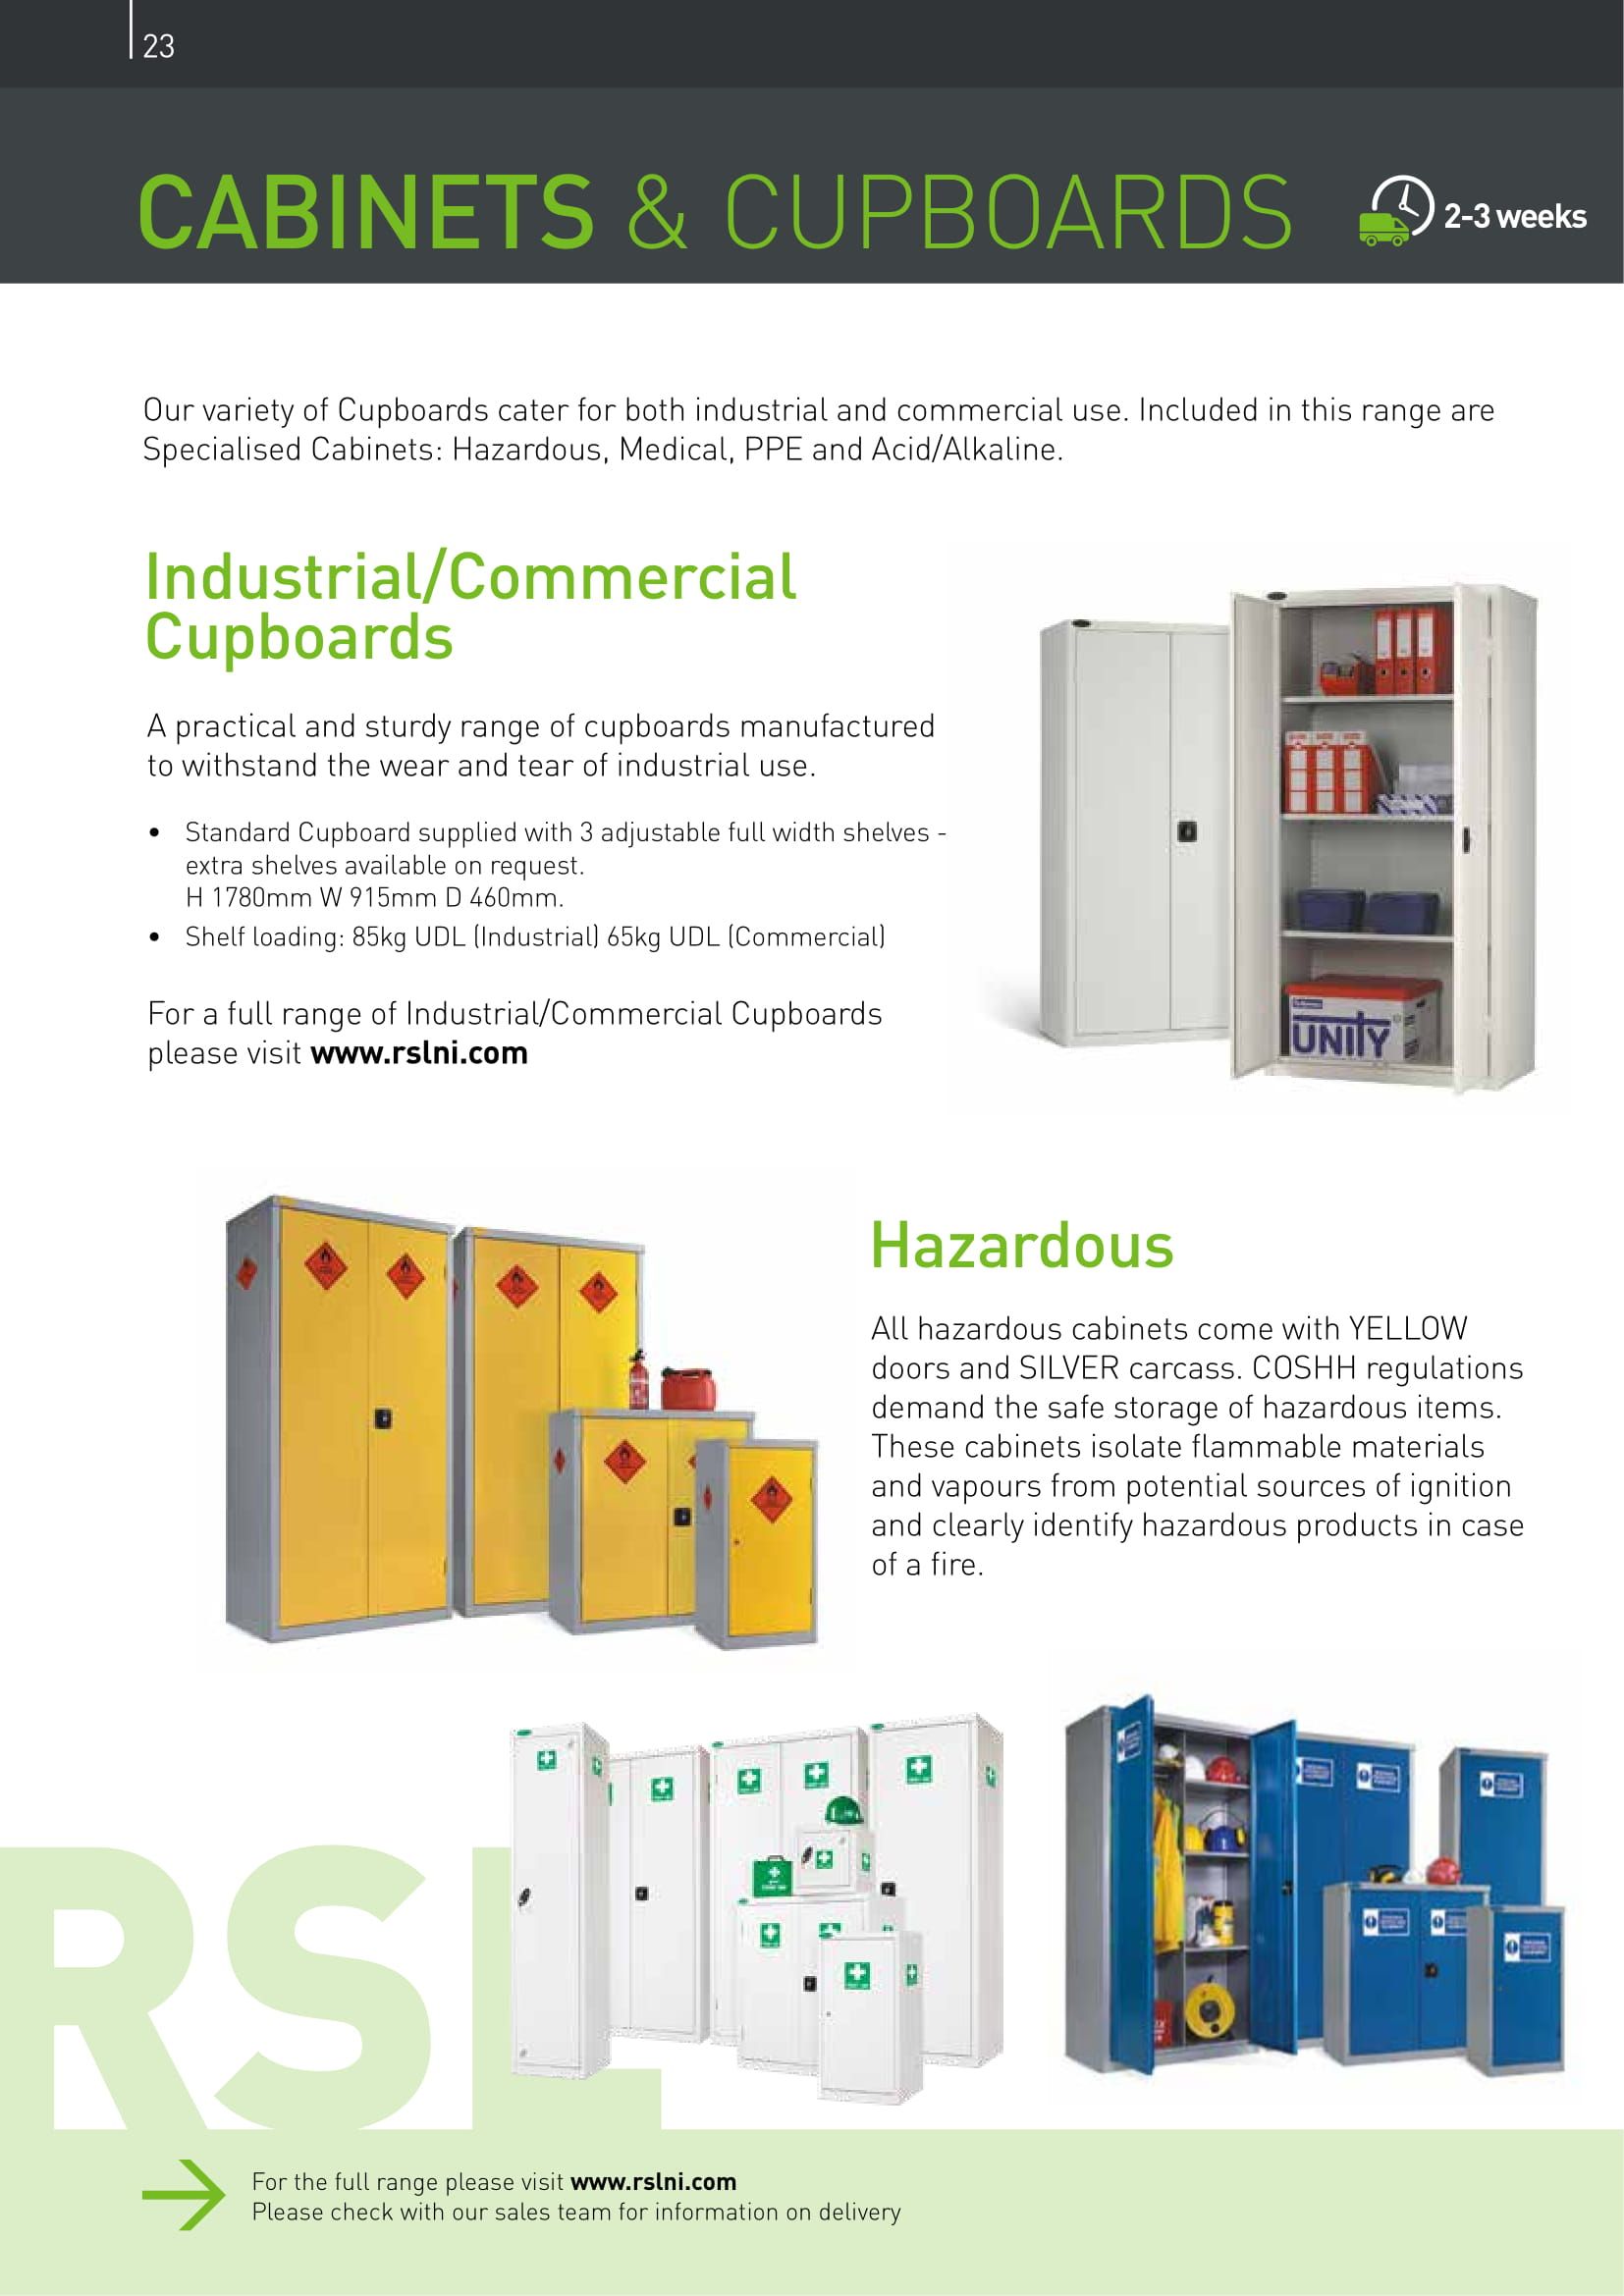 Cabinets and cupboards brochure page showcasing industrial and hazardous cupboards.